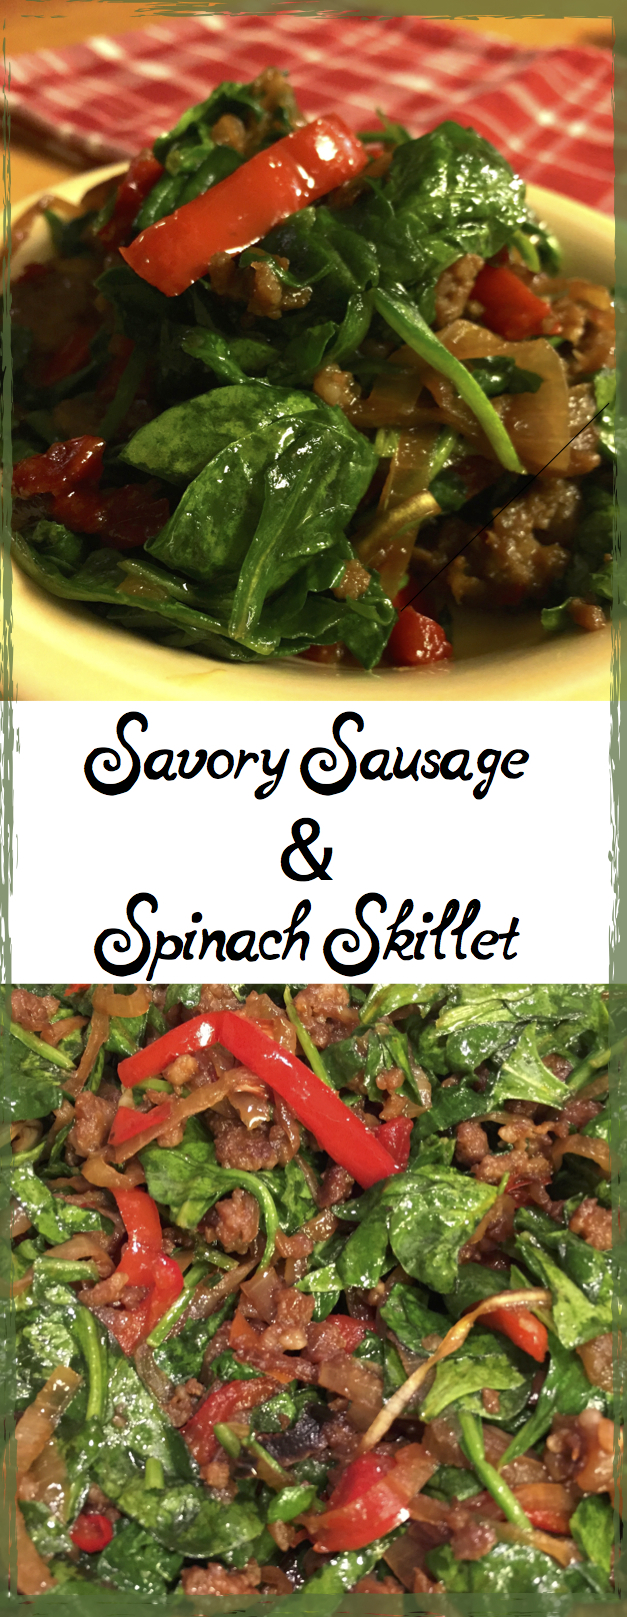 Only 4 Ingredients!! A side dish that's as delicious as it is beautiful! This sausage & spinach skillet is hearty, healthy, and easy!